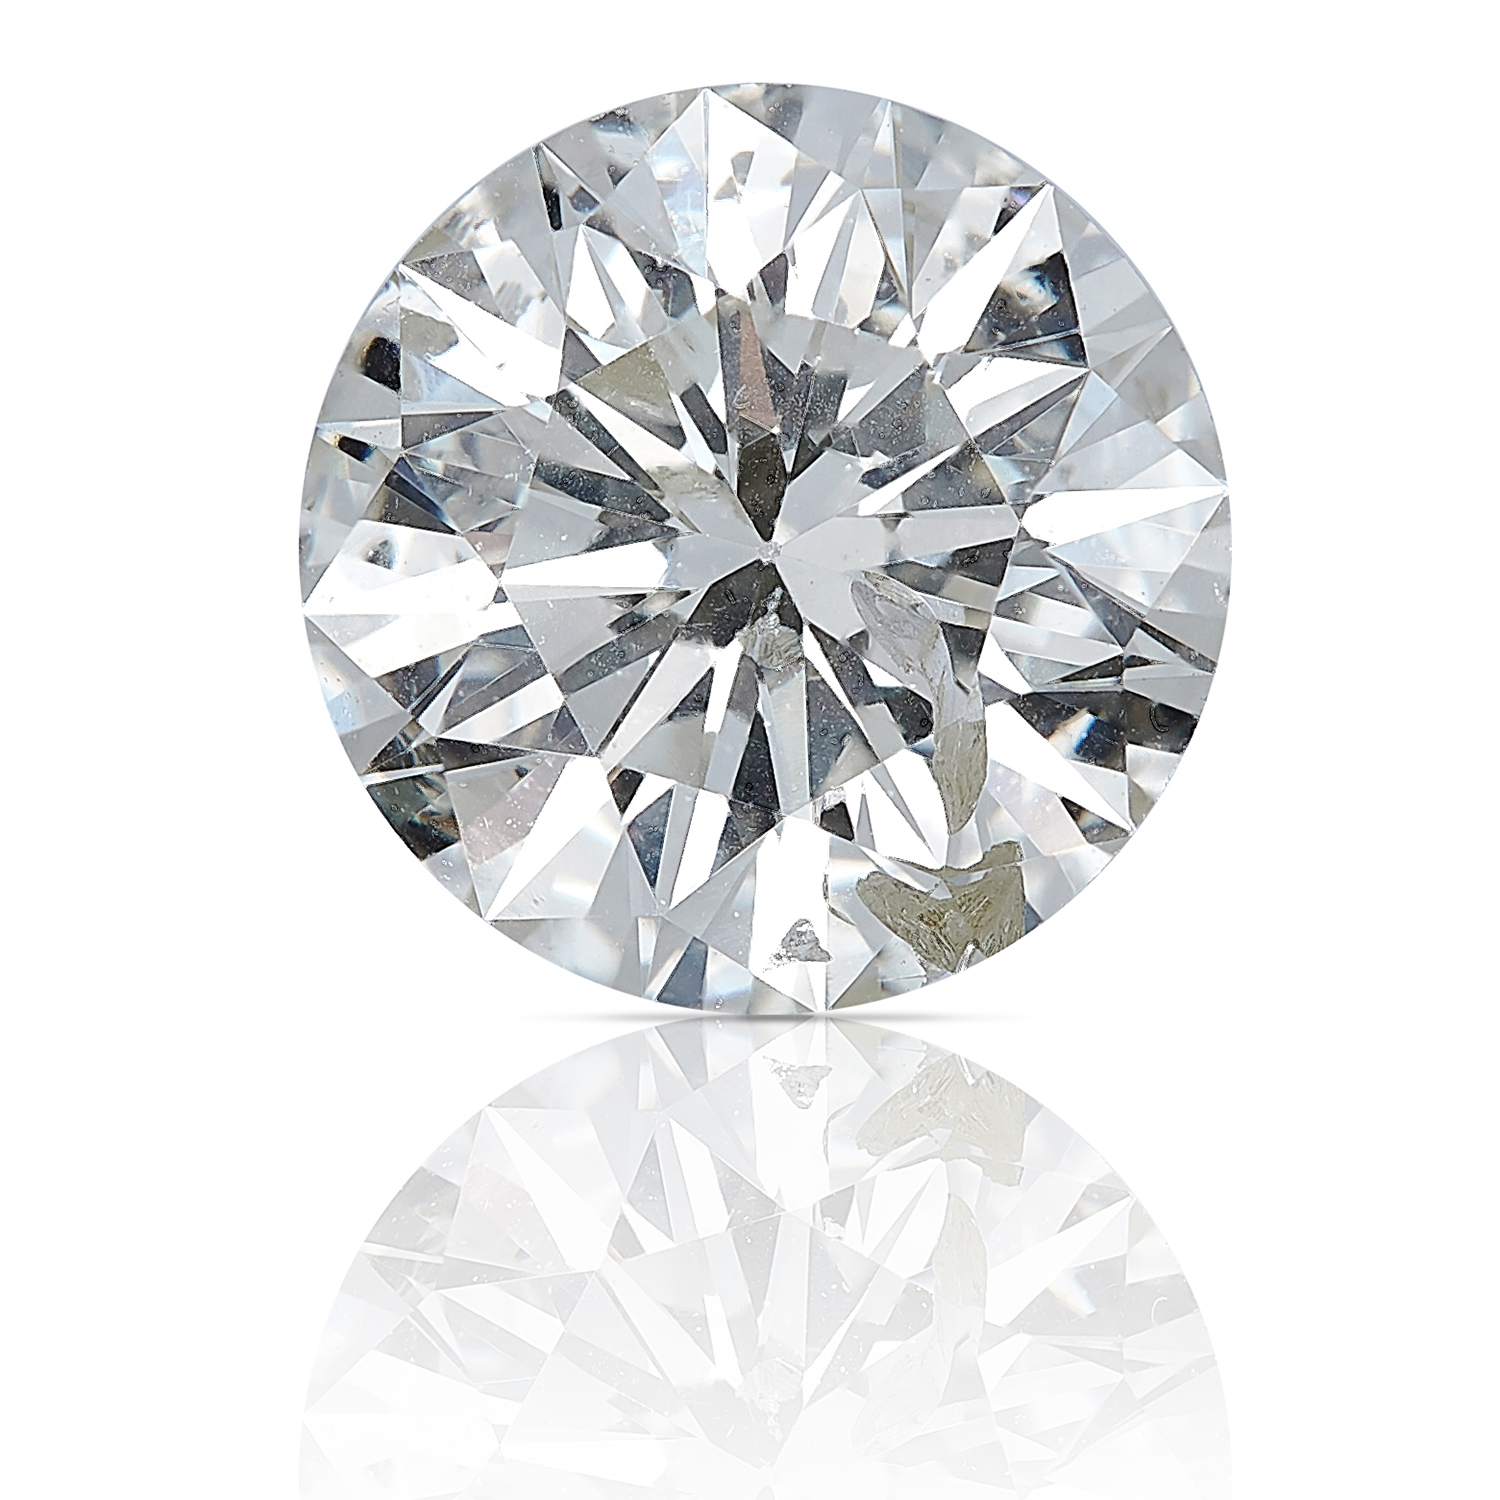 A ROUND CUT MODERN BRILLIANT DIAMOND TOTALLING 1.14cts, UNMOUNTED.